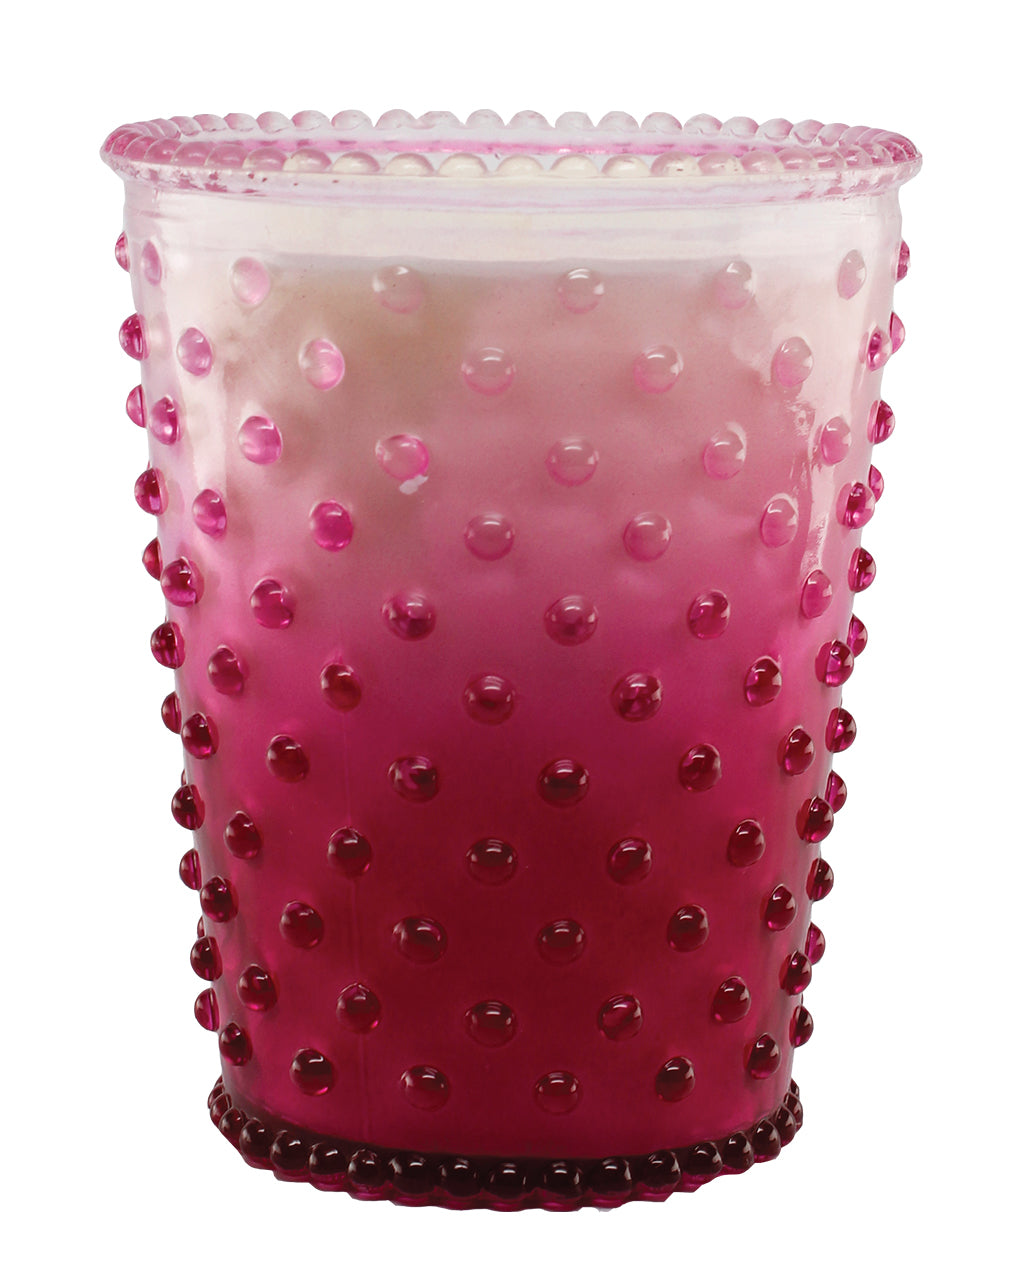 A translucent pink Simpatico NO. 61 Limited Edition Berry Wine Hobnail Glass Candle with a textured surface featuring raised dots, isolated on a white background.